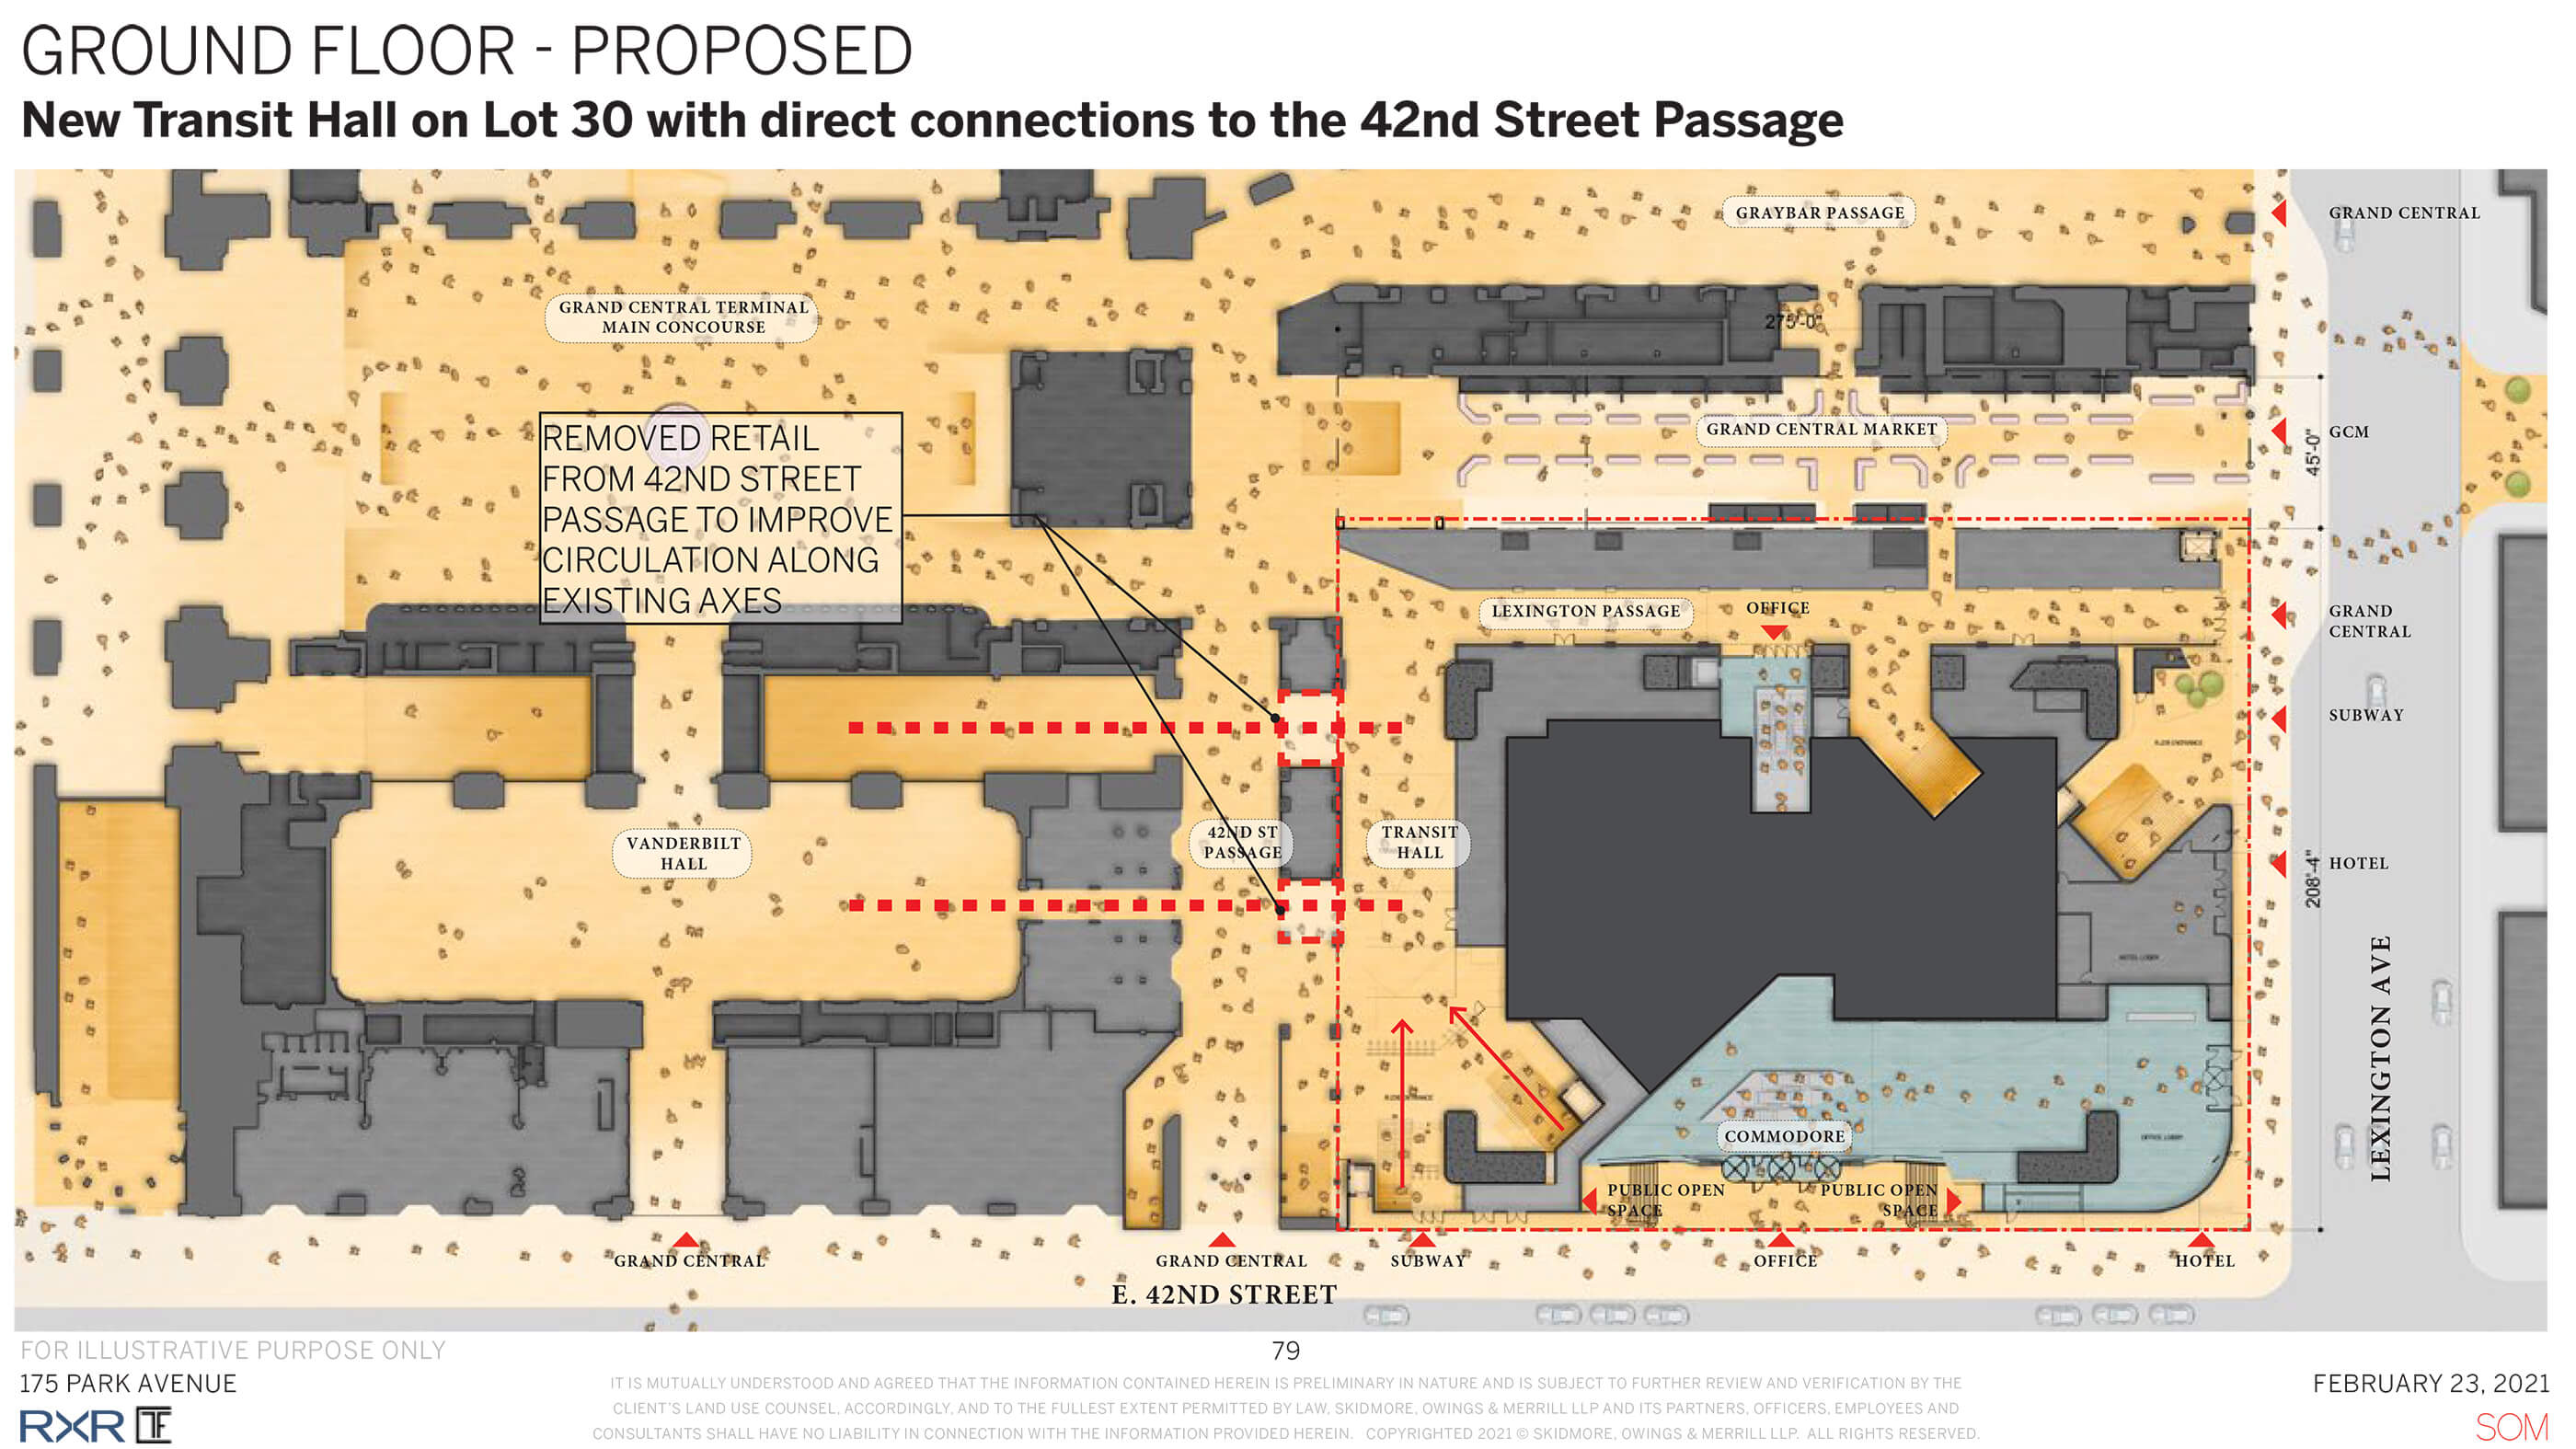 the proposed changes to that same rail passage with revamped circulation and retail